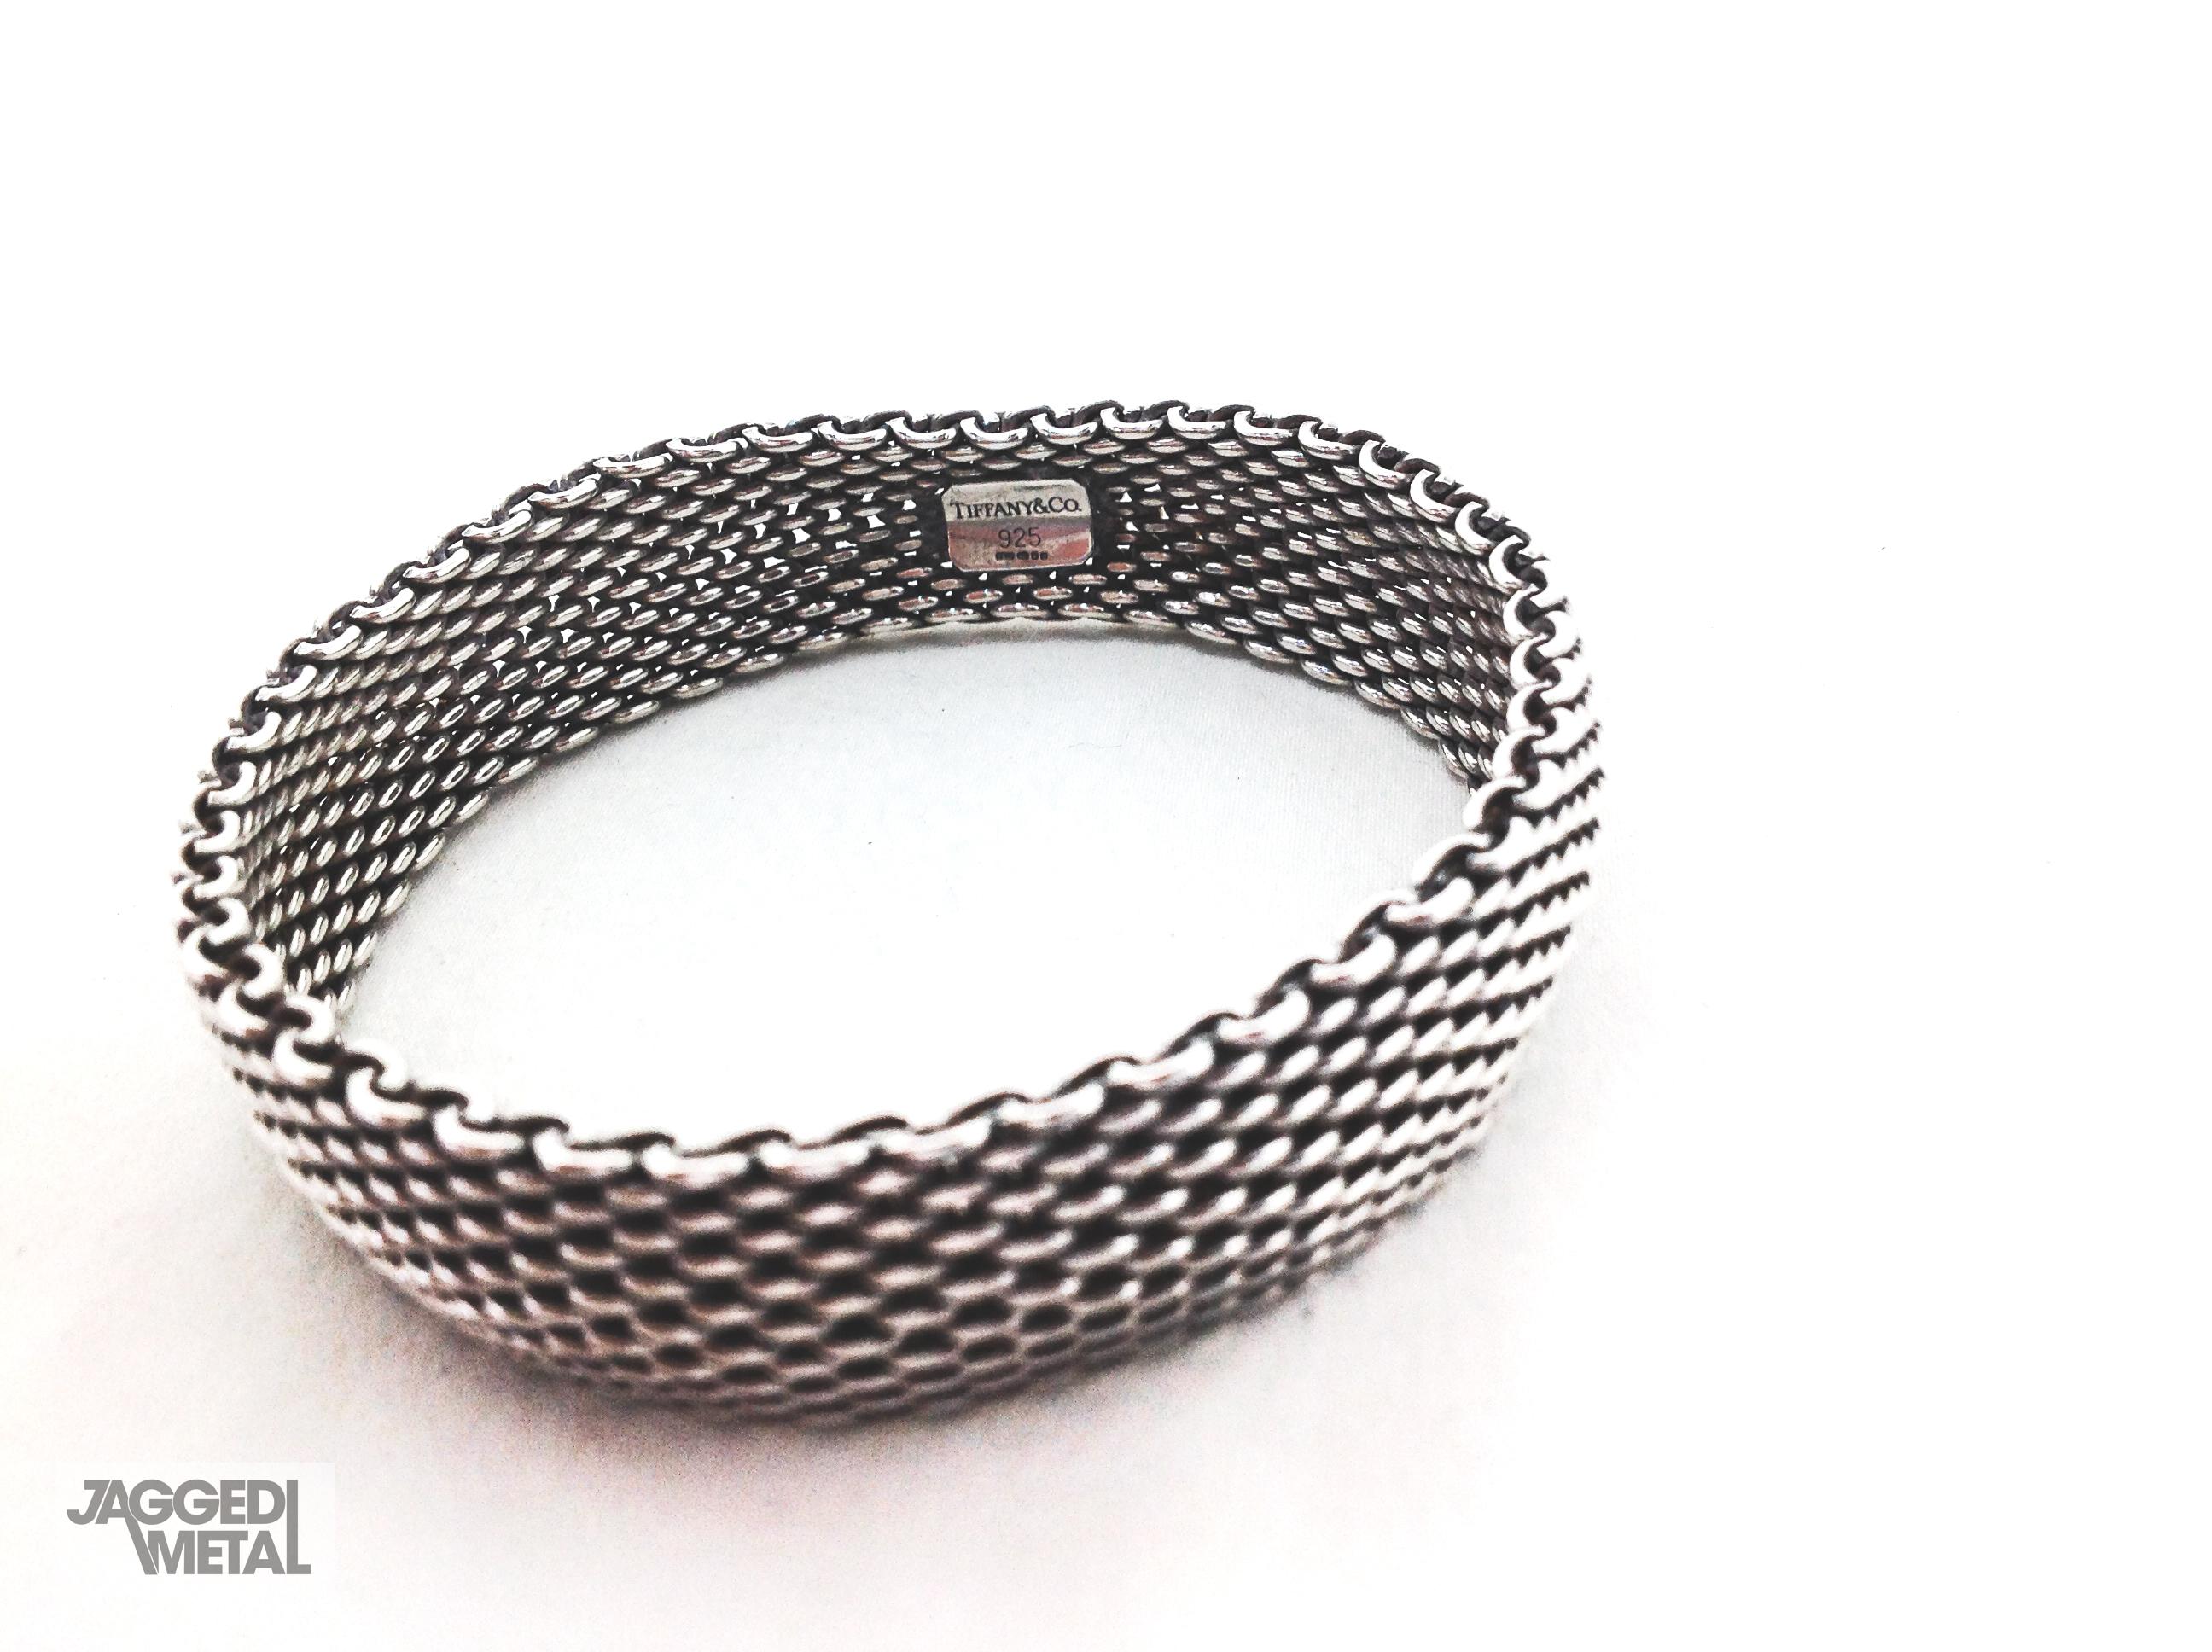 Tiffany Bracelet Somerset Sterling Silver 

Tiffany & Company Somerset Mesh Weave Bangle Bracelet. 

Detail
-Made in the early 2000s, cast from sterling silver
-Mesh weave texture

Size & Fit
-Height: 0.6 in. (15.24 mm)
-Diameter: 2.5 in. (63.5 mm),